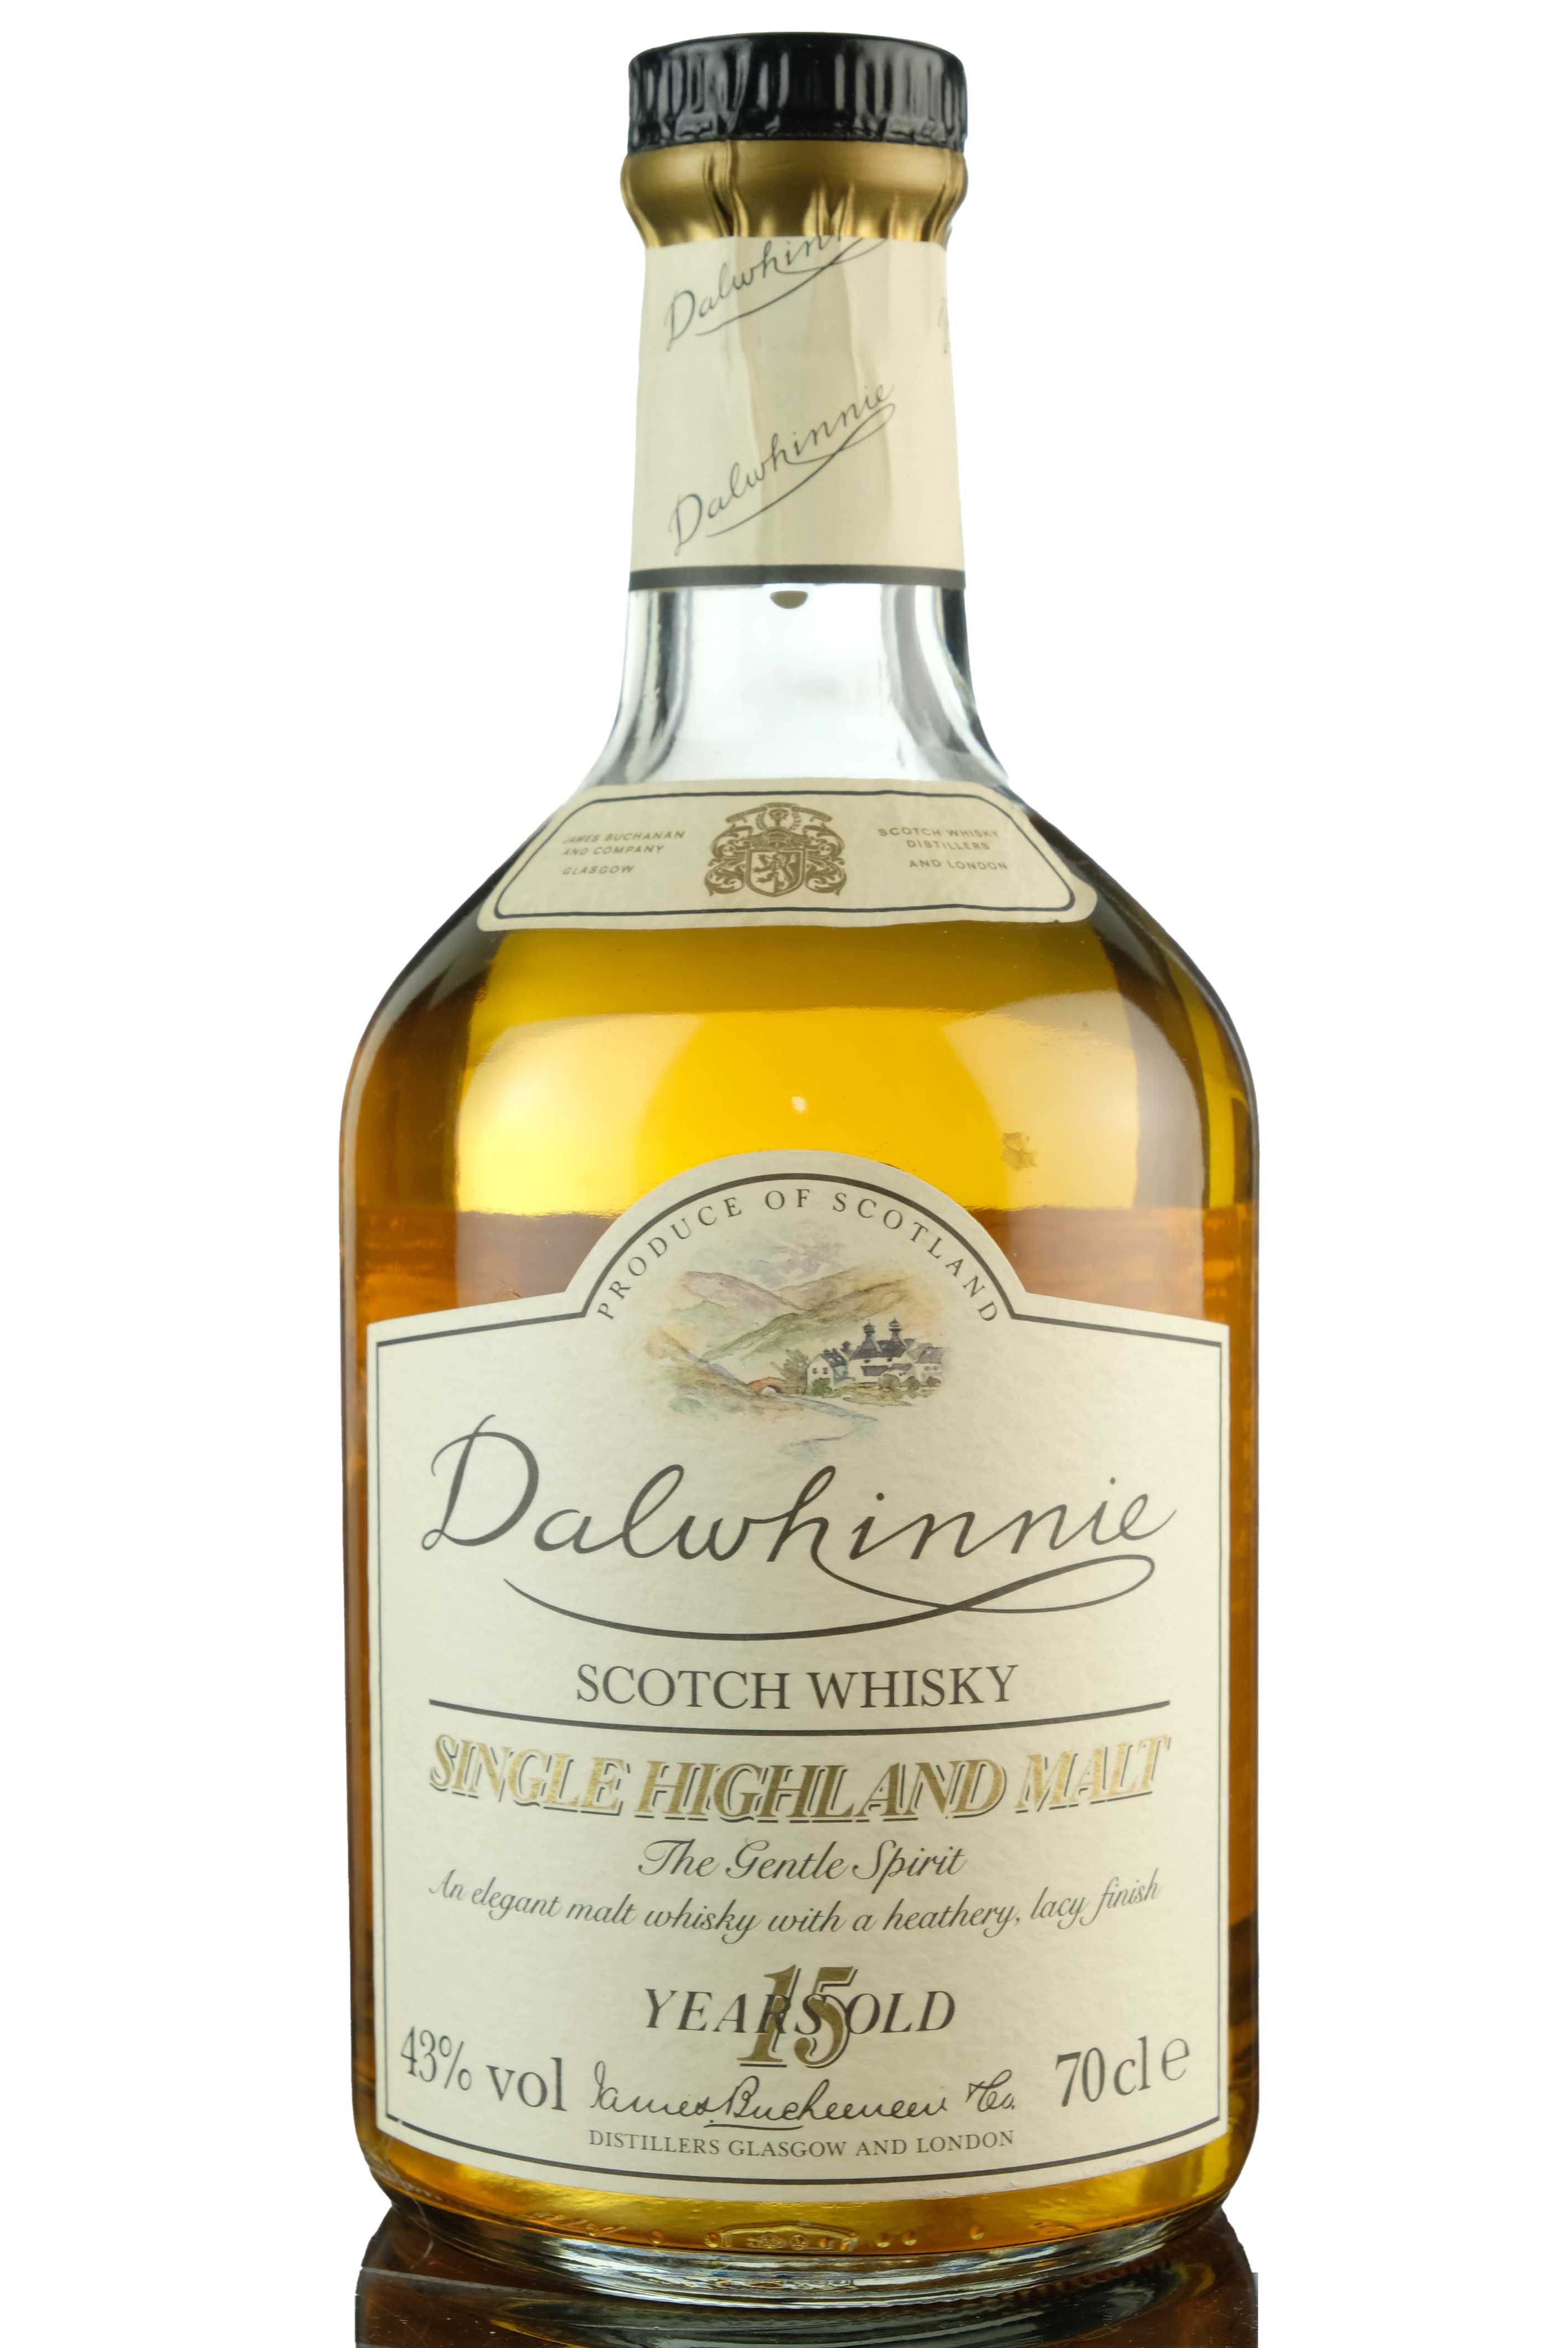 Dalwhinnie 15 Year Old - 1990s